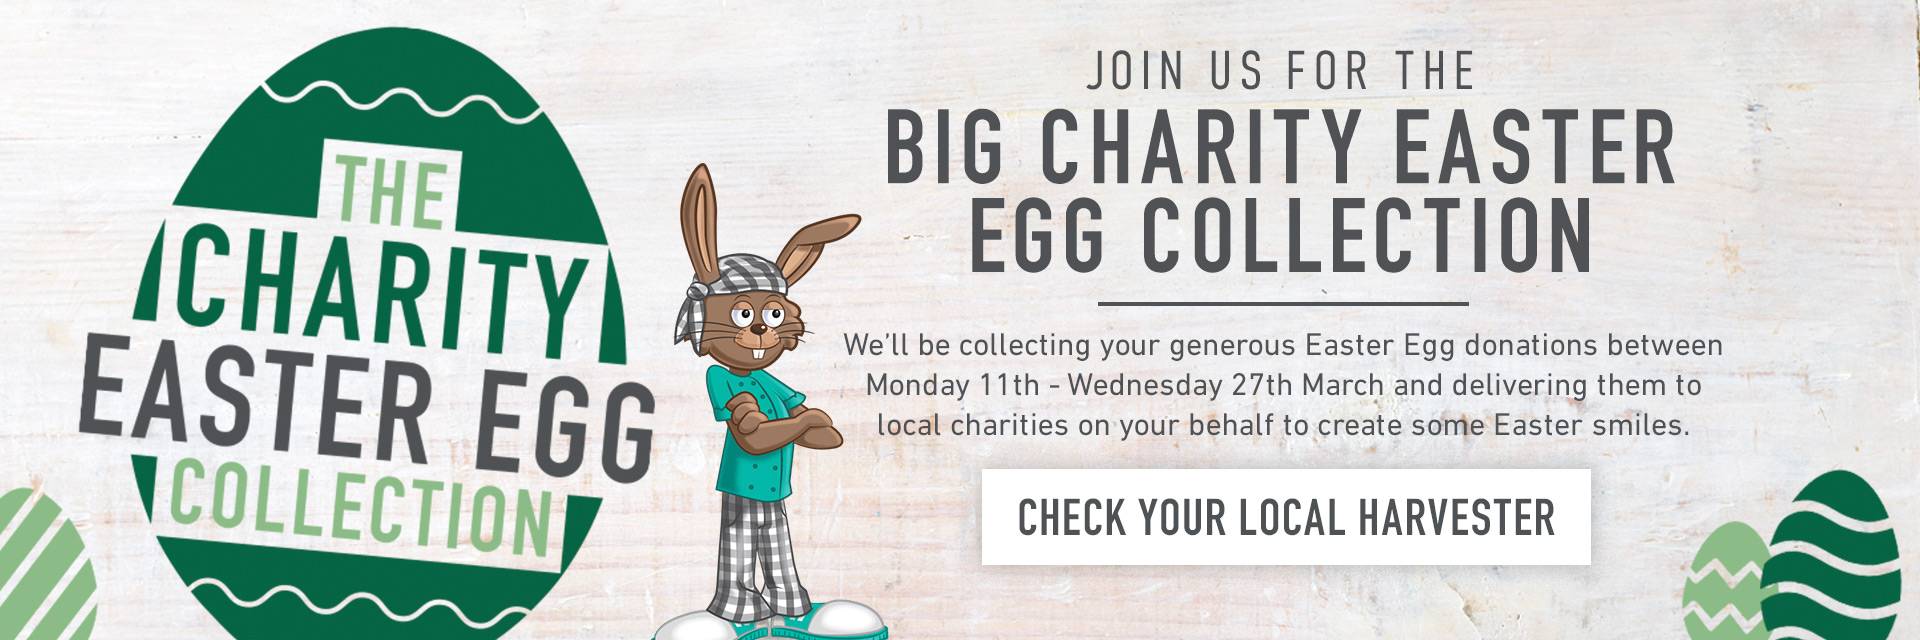 Easter Egg Collection at WHEATSHEAF LOUGHBOROUGH 